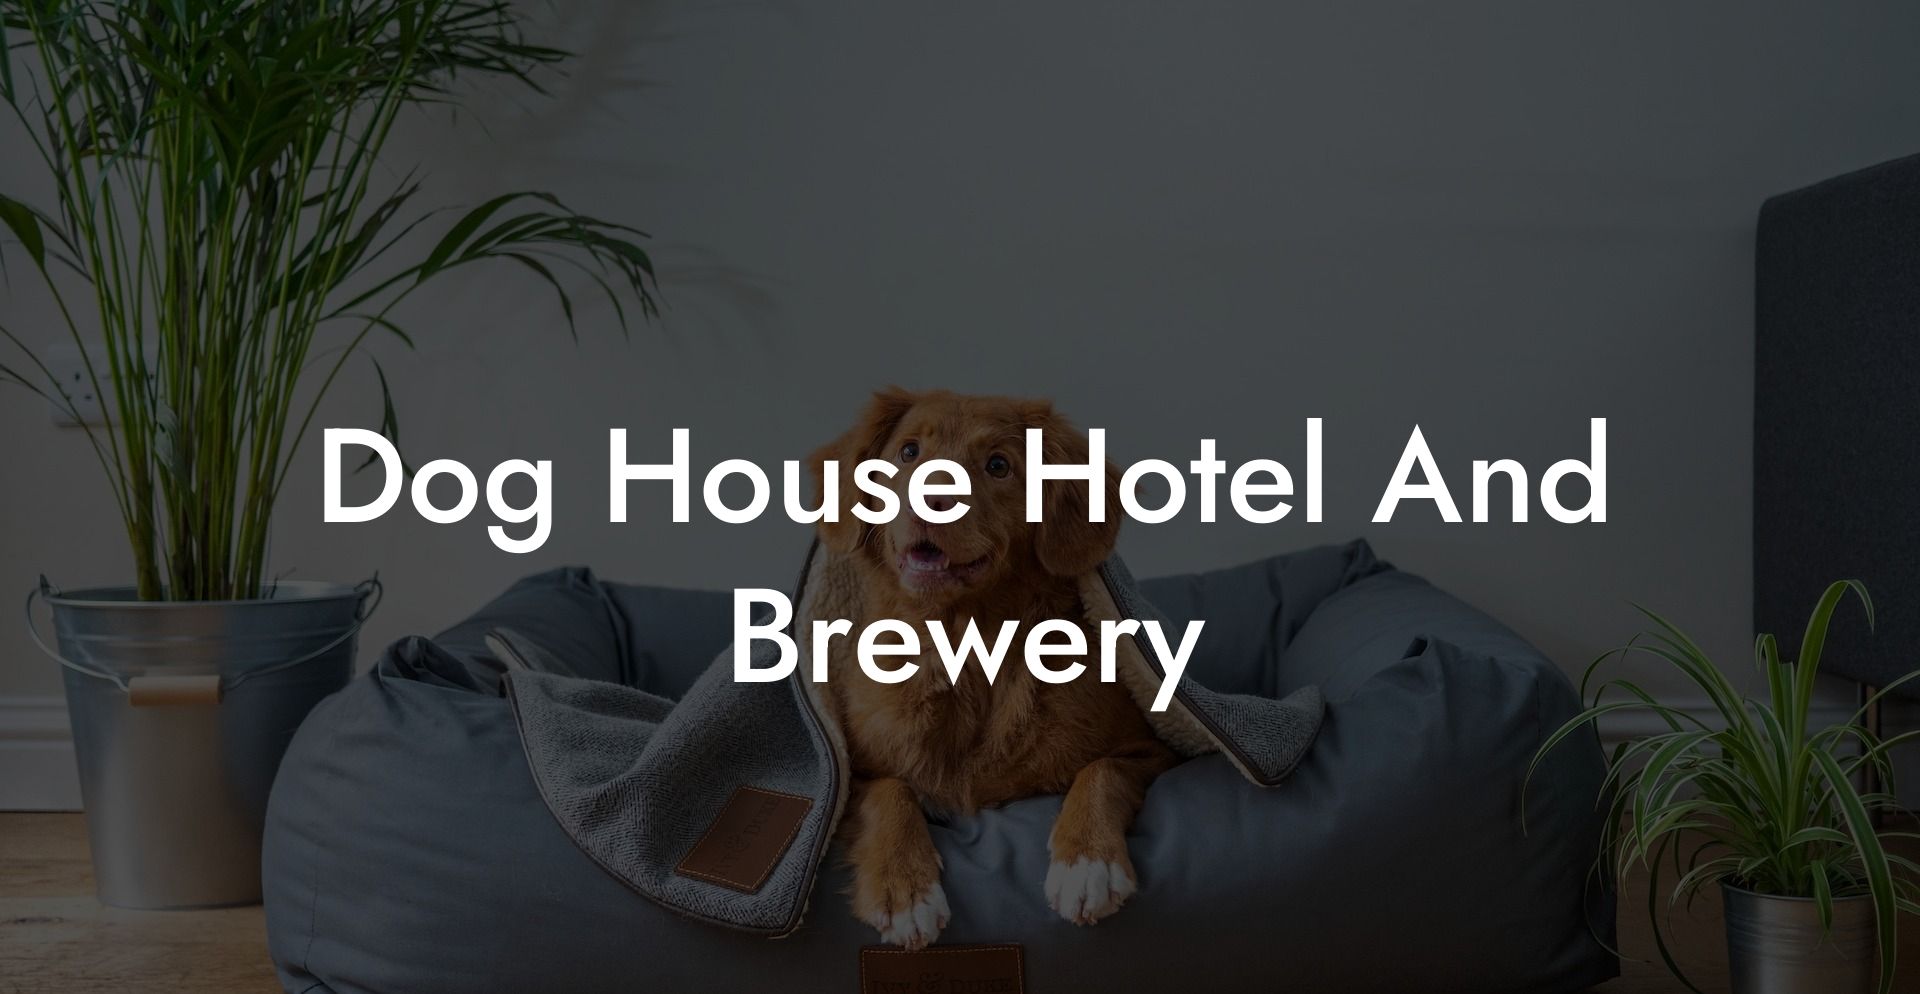 Dog House Hotel And Brewery